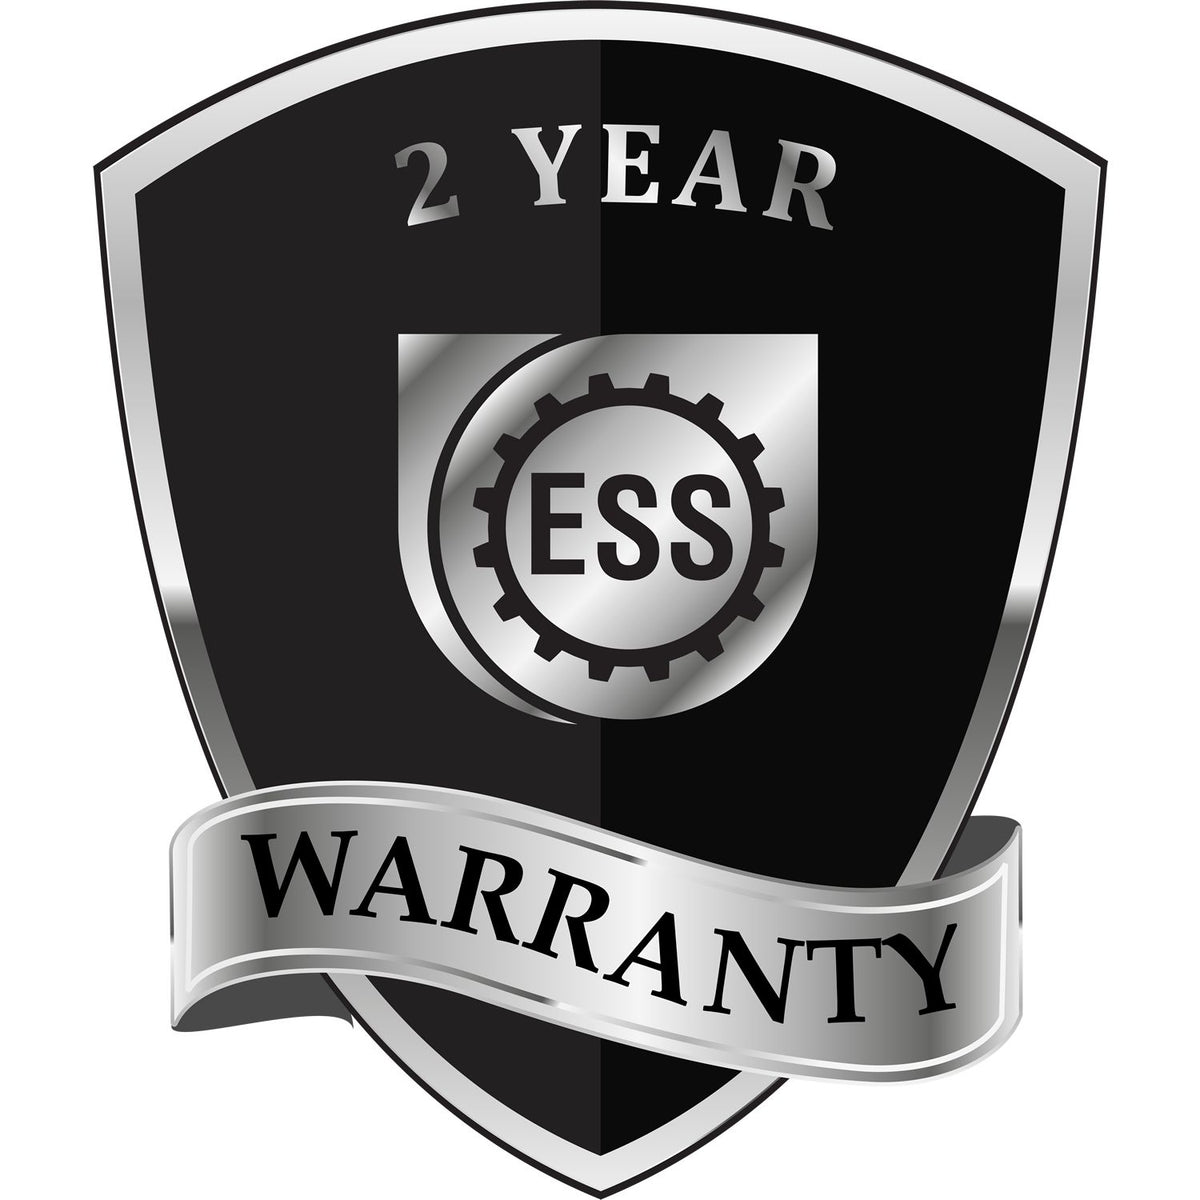 A black and silver badge or emblem showing warranty information for the New York Geologist Desk Seal